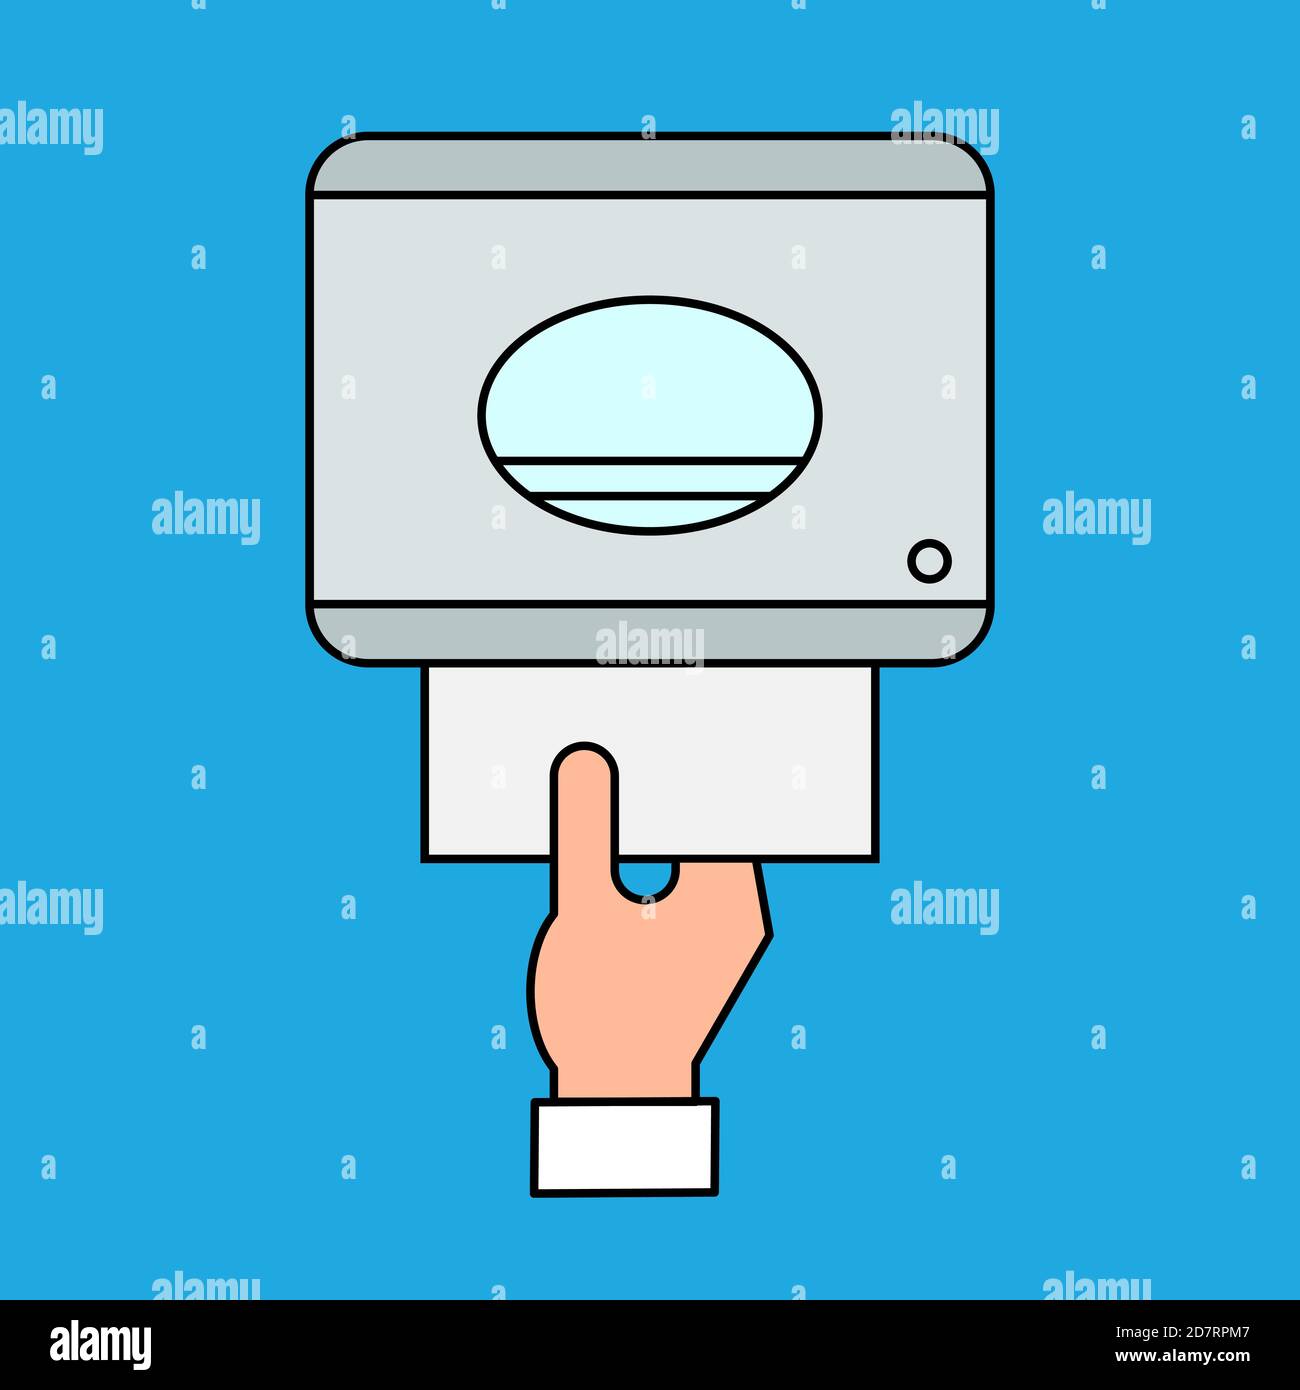 Automatic touchless towel dispenser with sensor on the wall. Drying hands safely. Paper dispenser icon. Hand pulling paper towel in the bathroom. Stock Vector